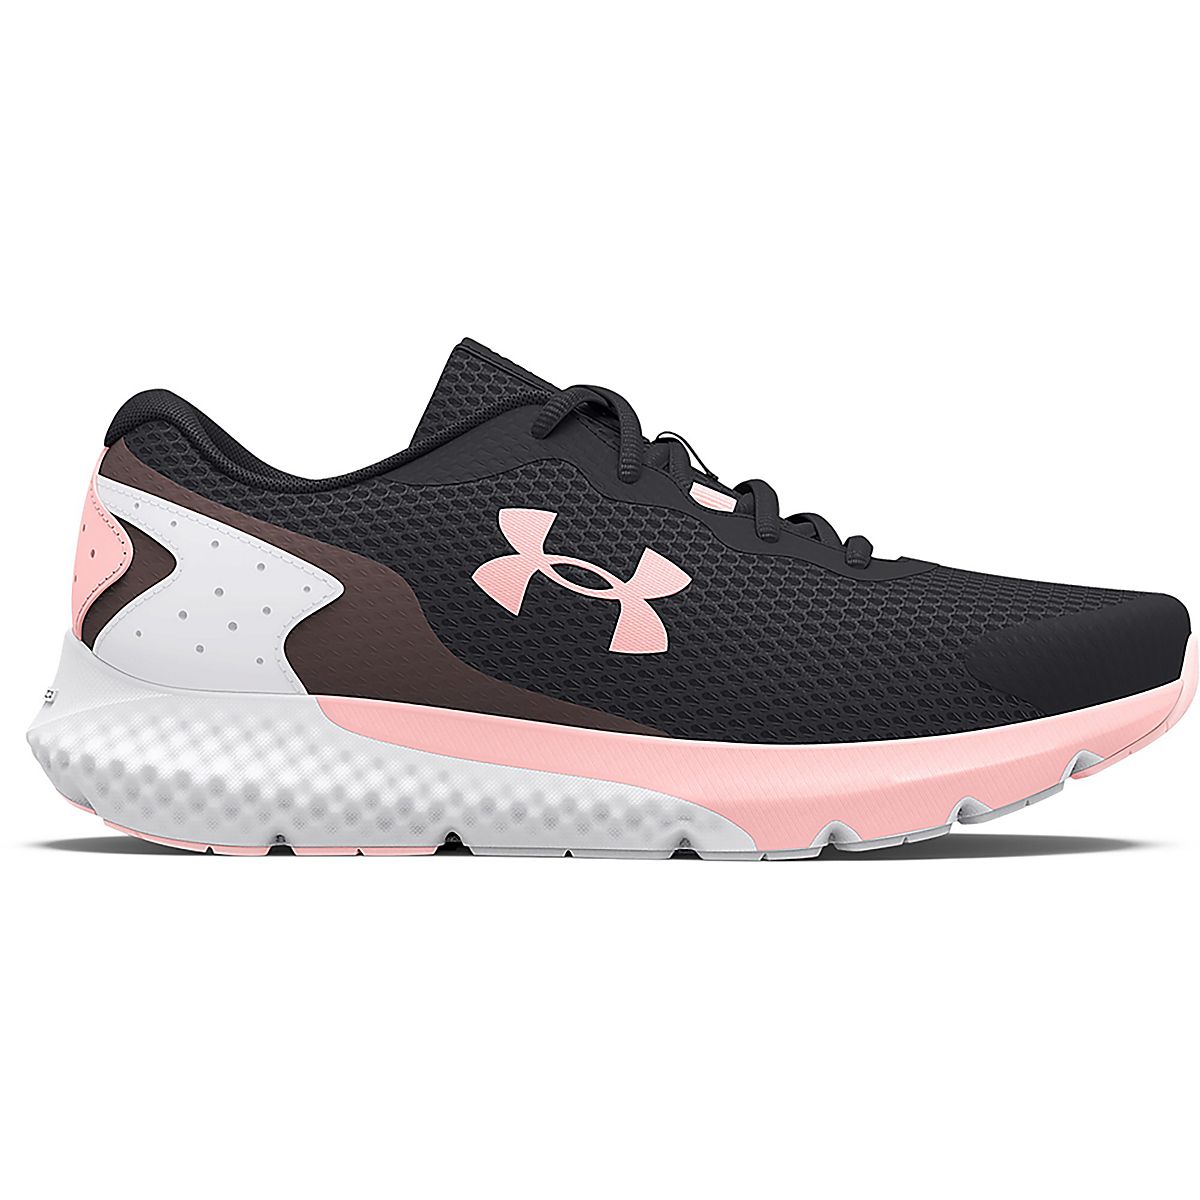 Under Armour Girls' Rogue 3 Shoe | Free Shipping at Academy